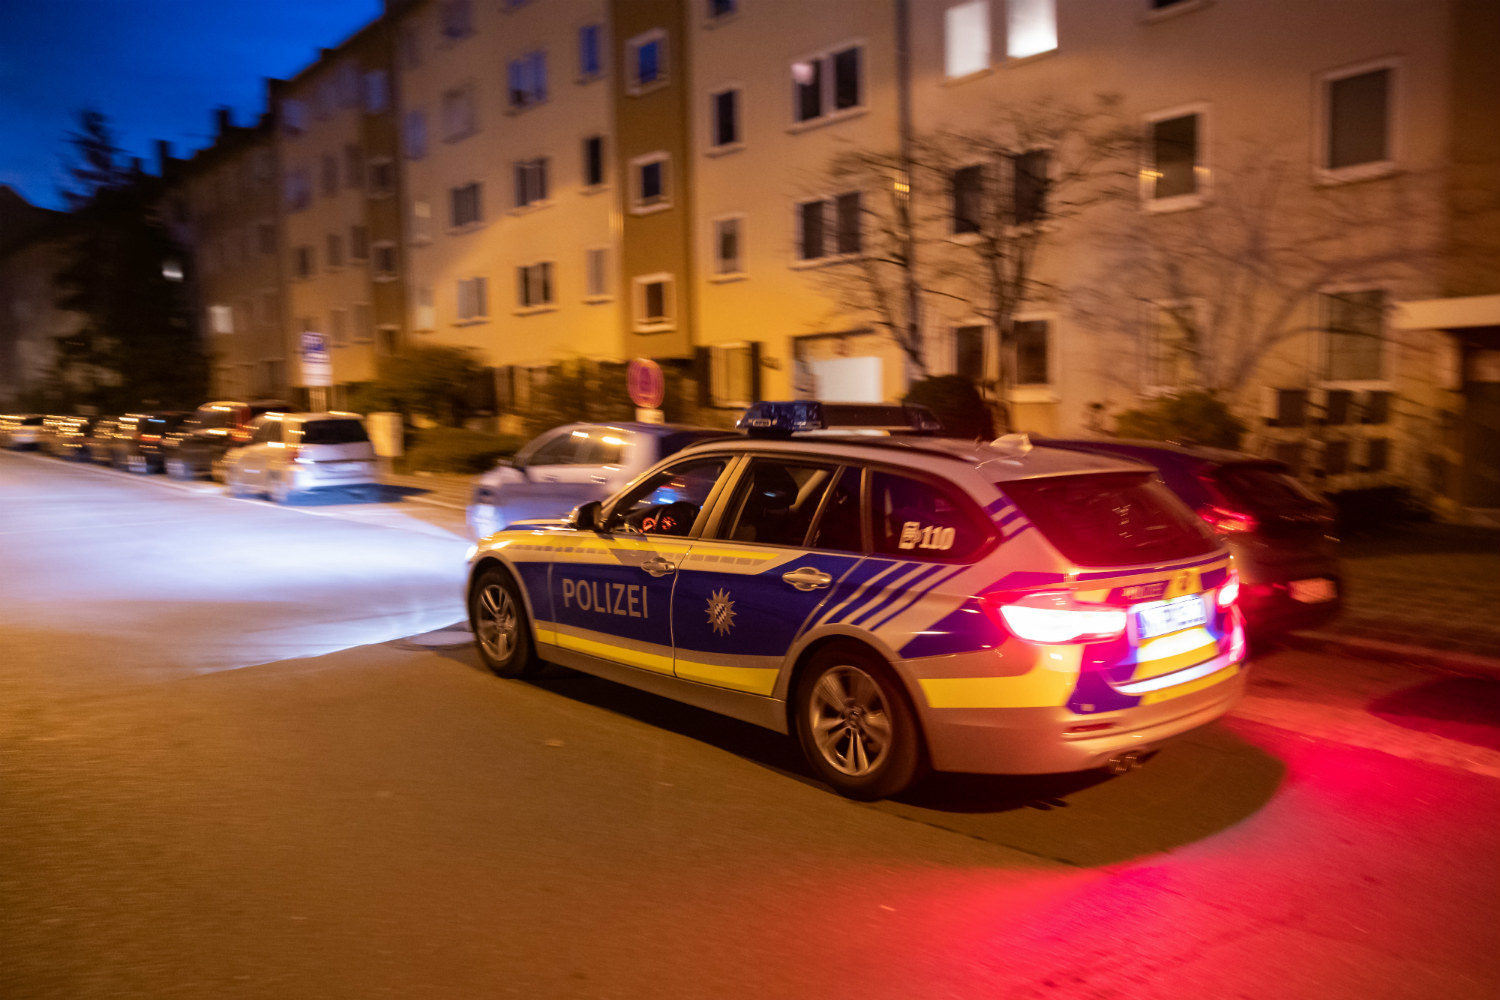 A police car in Nuremberg early on Friday morning.